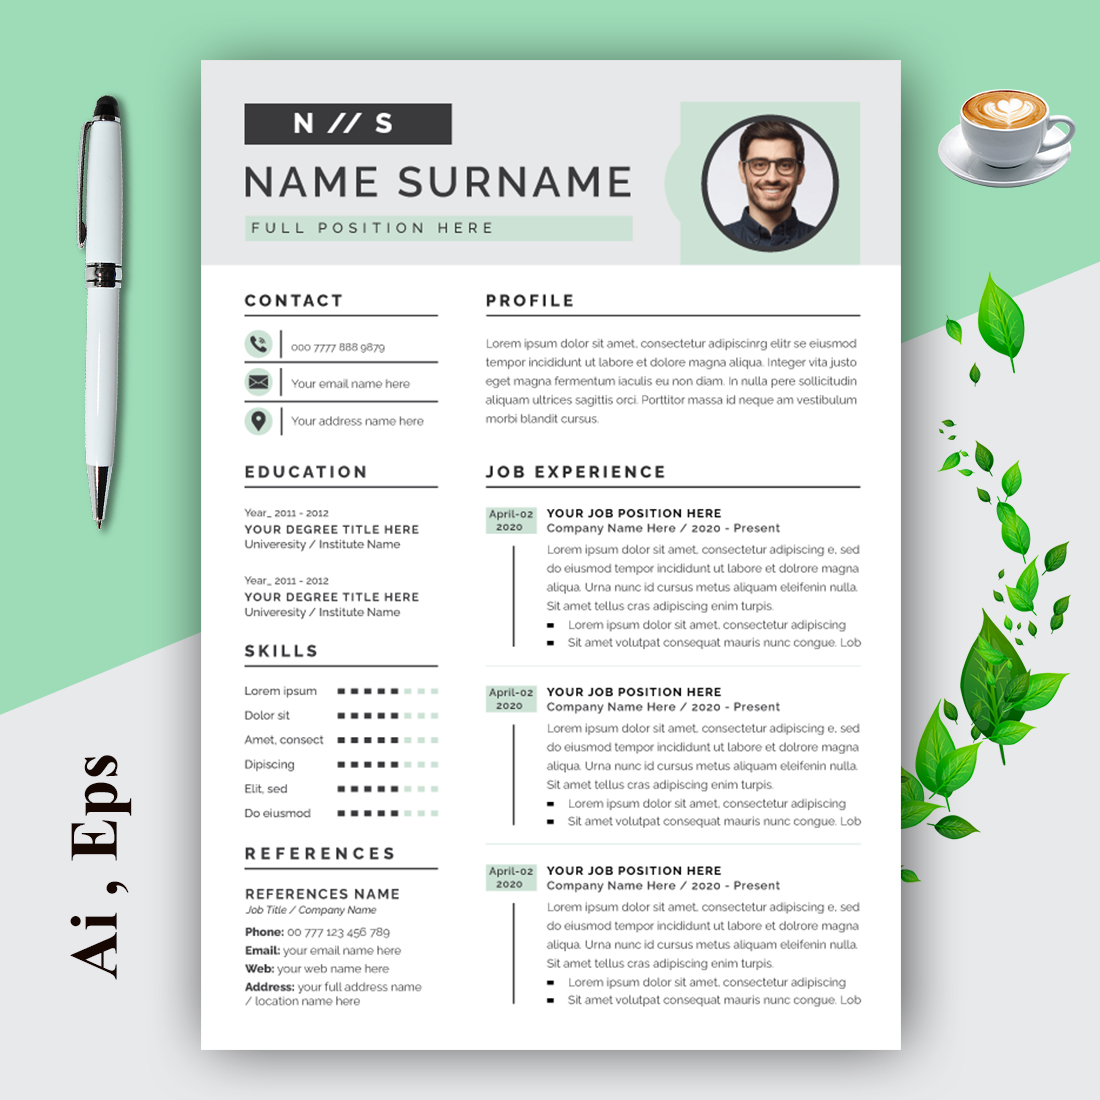 Creative Resume And Cover Letter Layout Design cover image.